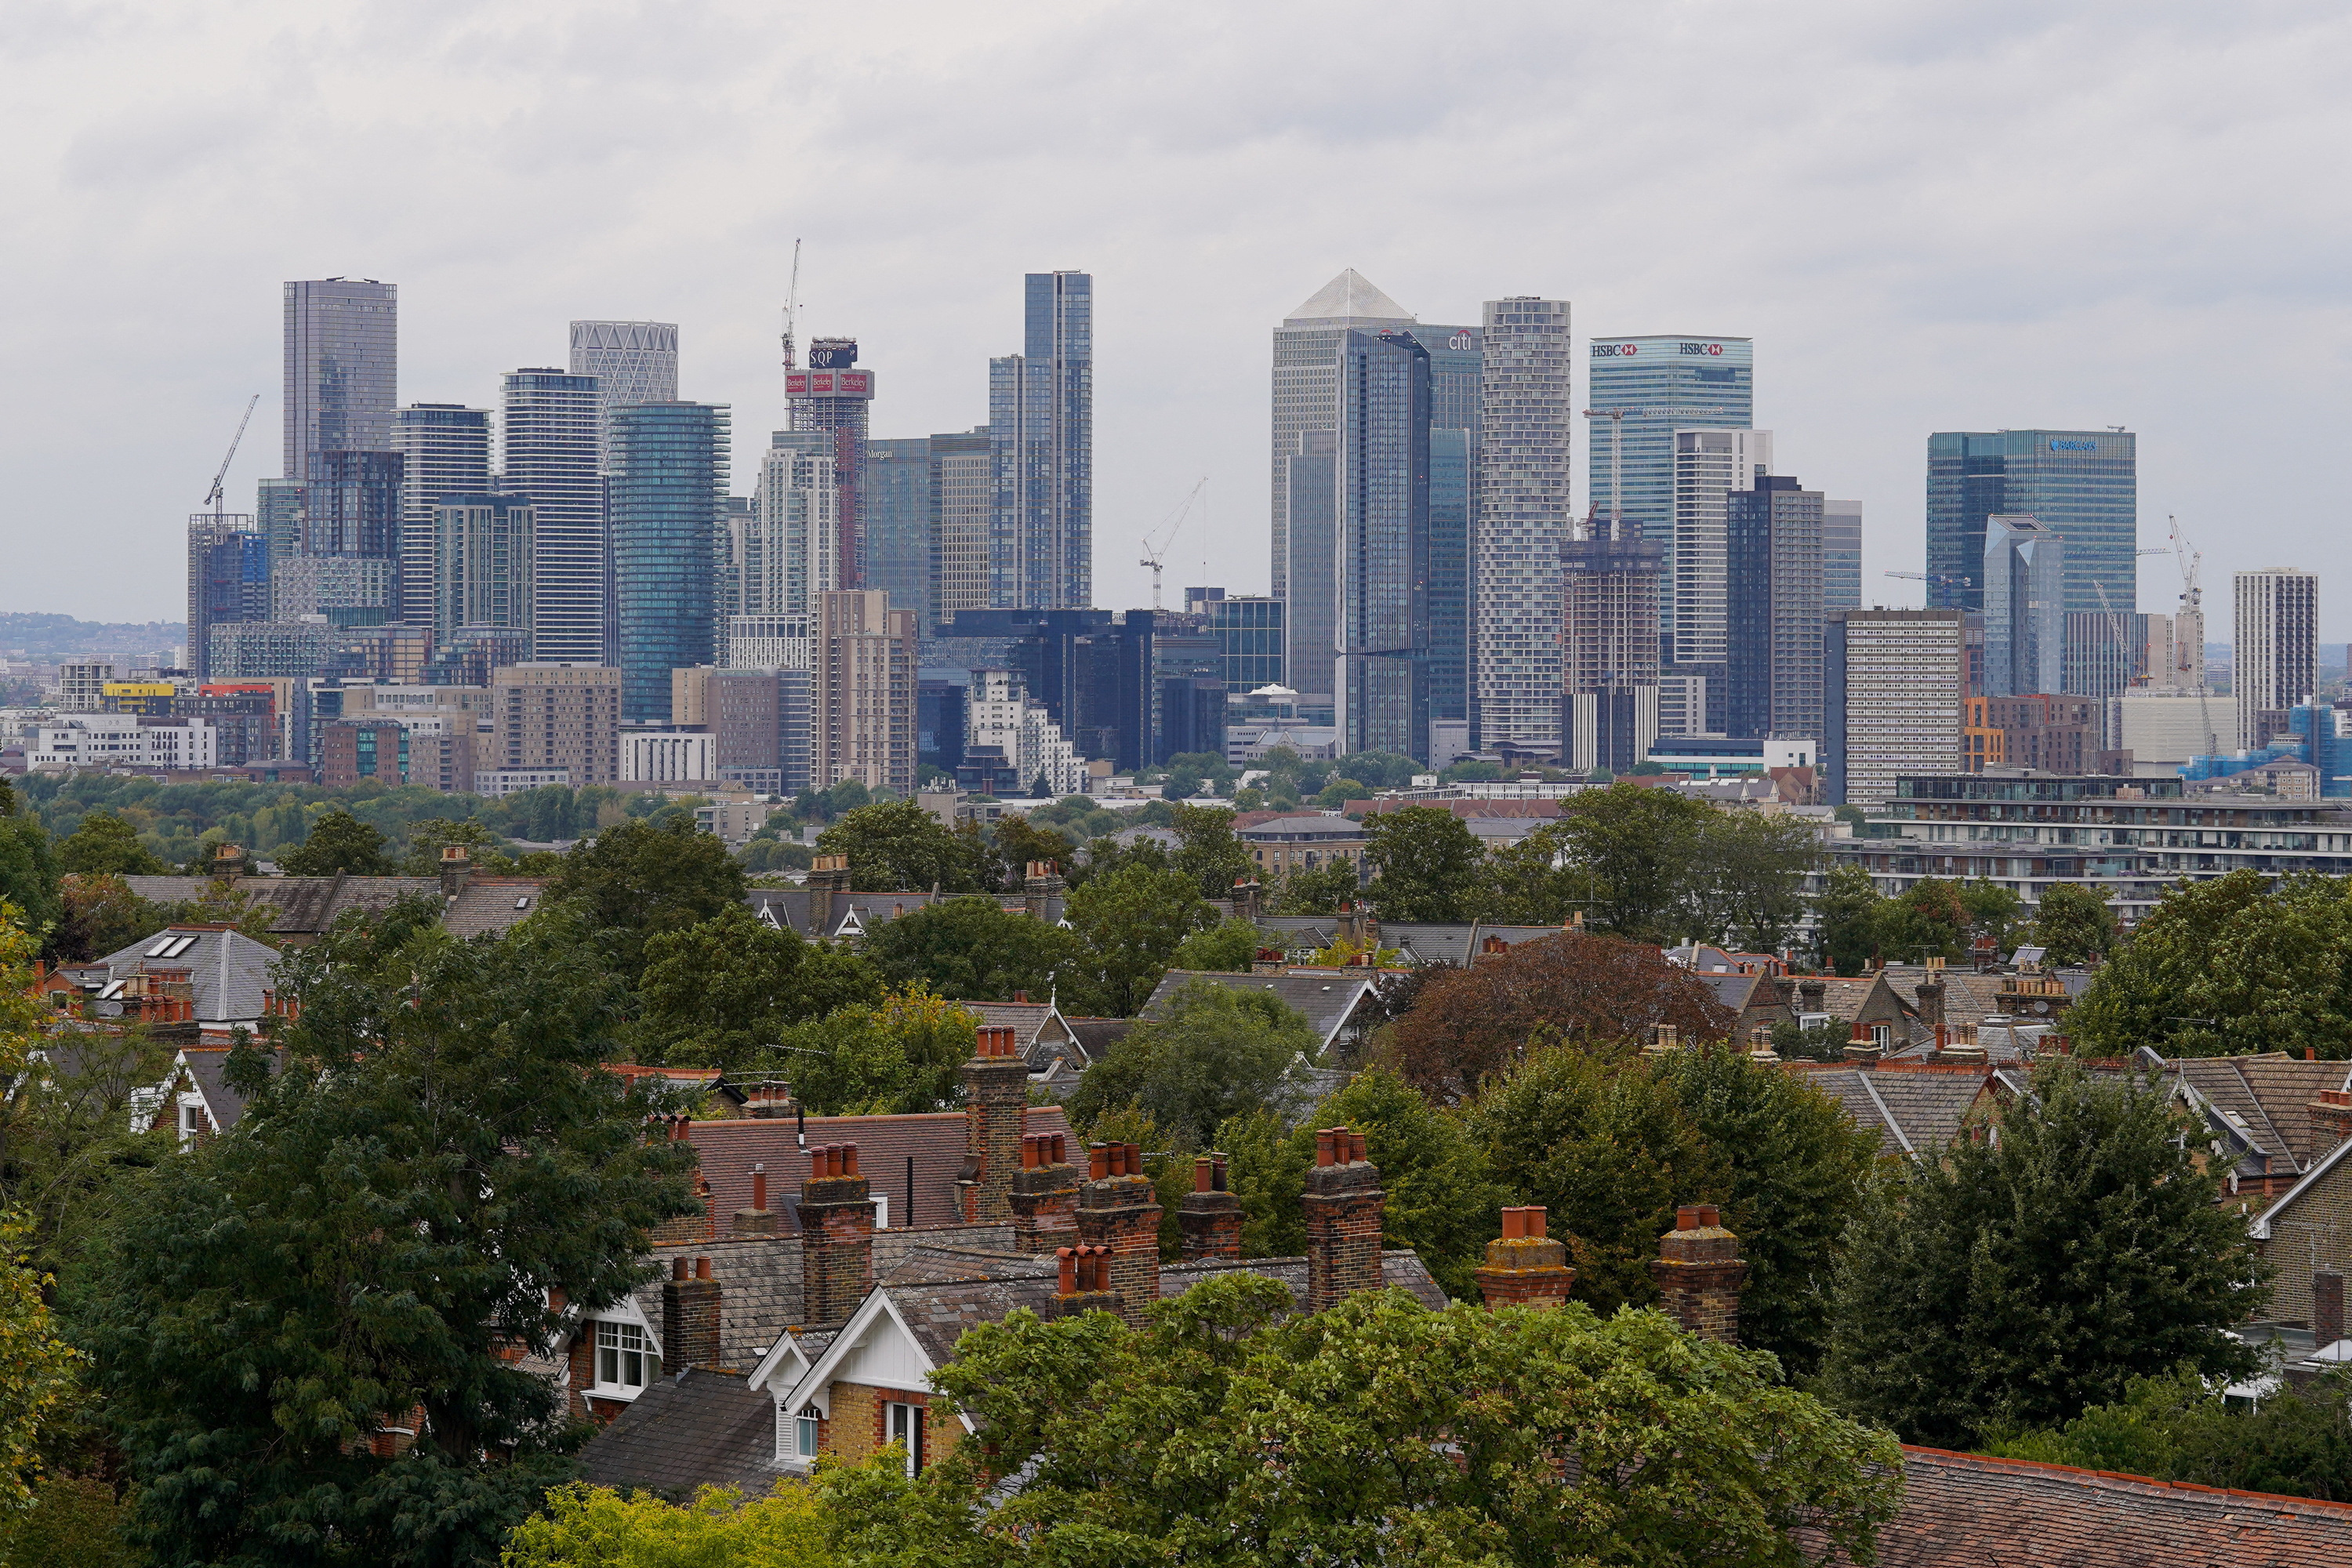 A general view of the Canary Wharf financial district in London